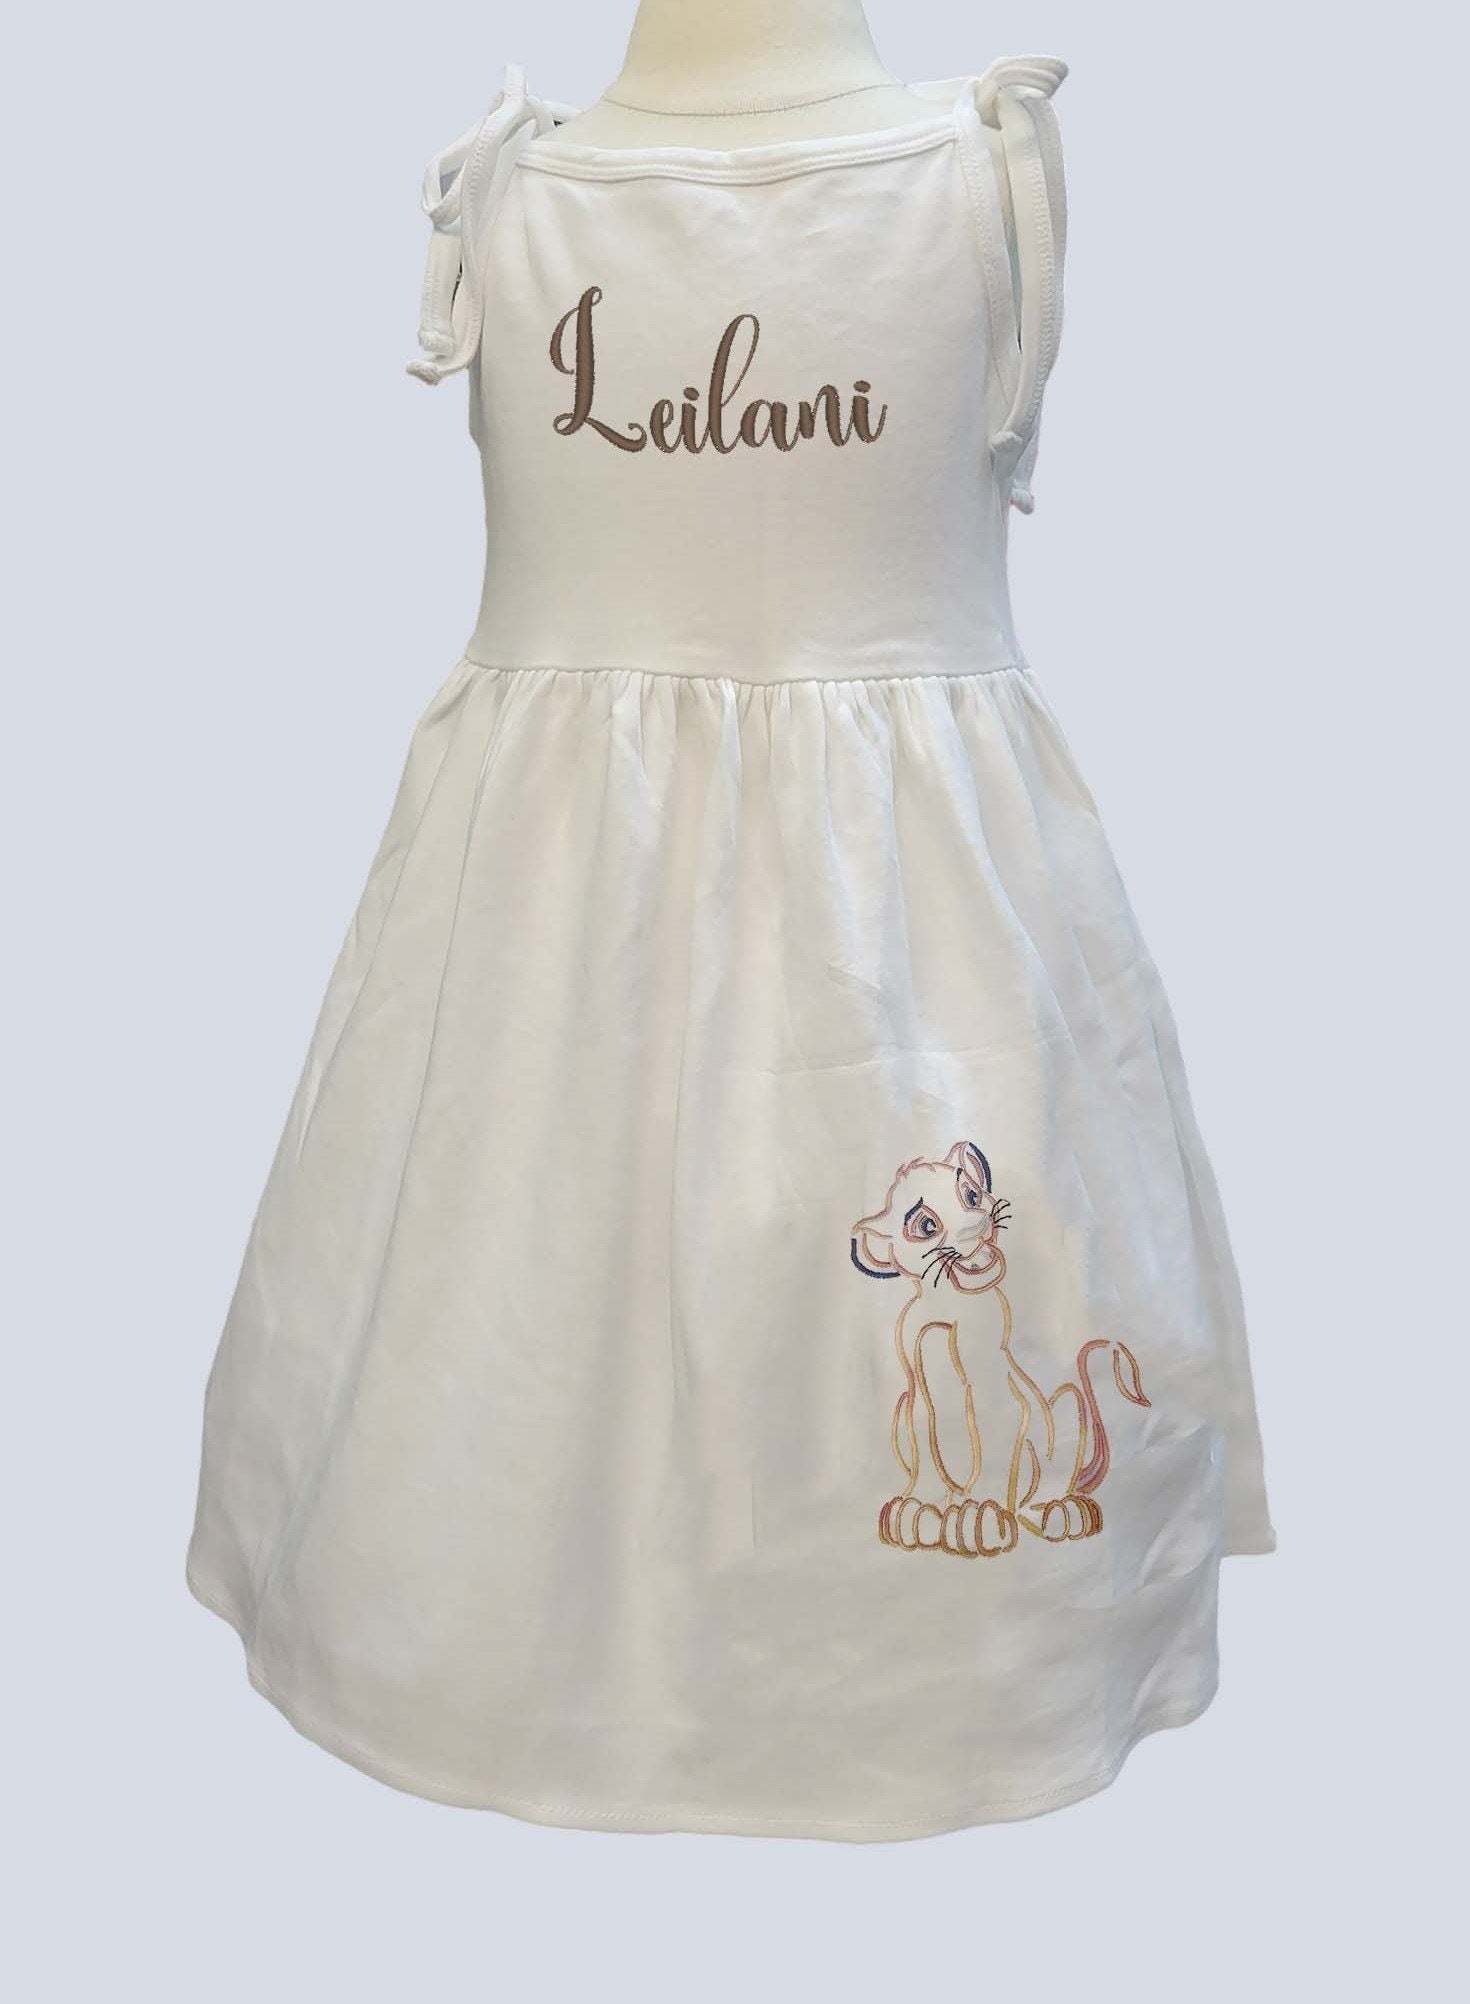 Lion King Dress, Simba Birthday Dress, Personalized  Lion King  outfit